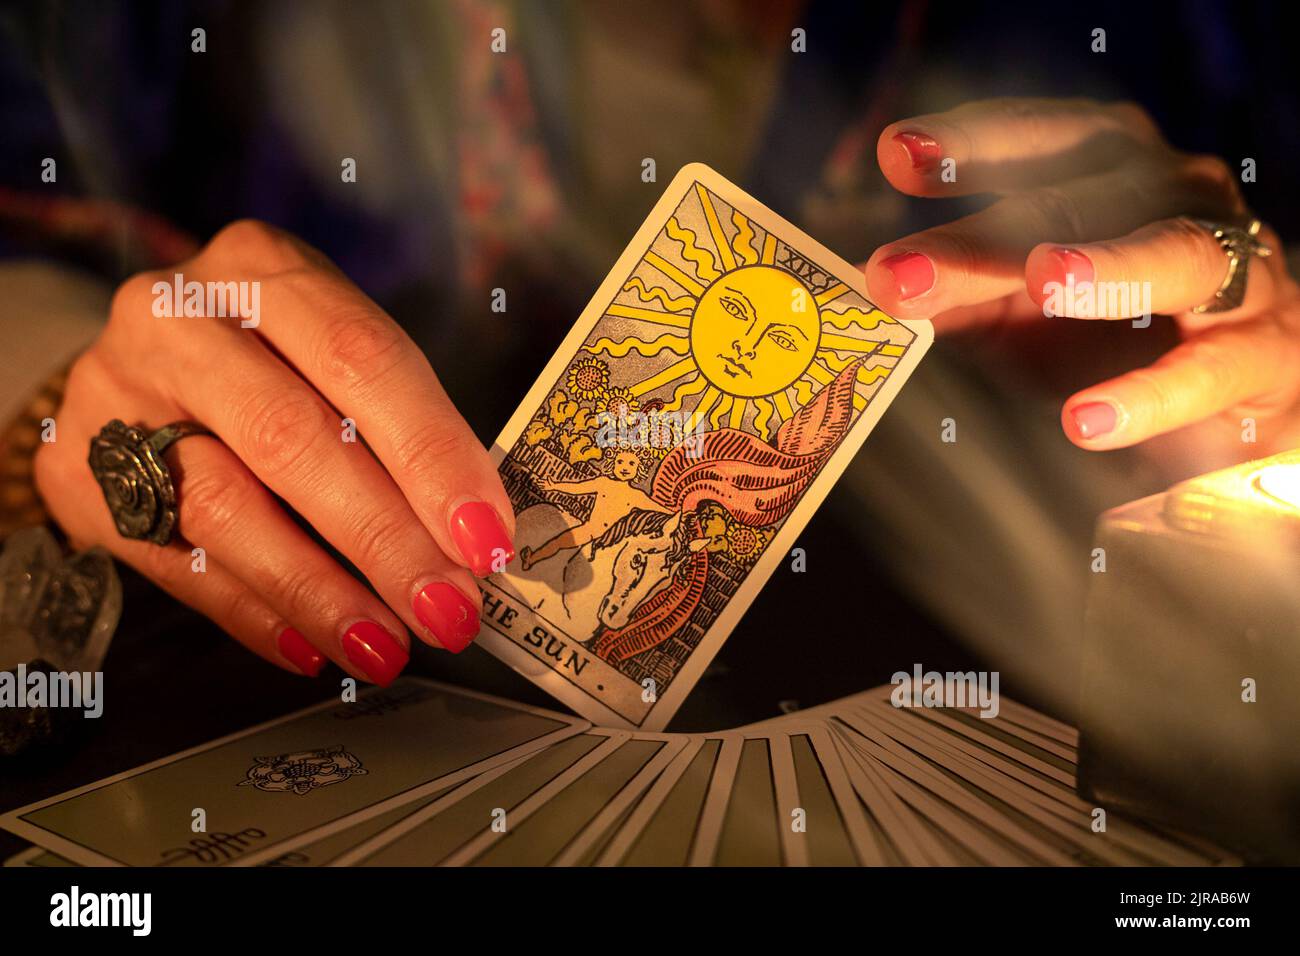 Fortune teller female hands showing The Sun tarot card, symbol of positivity and optimism, during a reading. Close-up with candle light and smoke Stock Photo